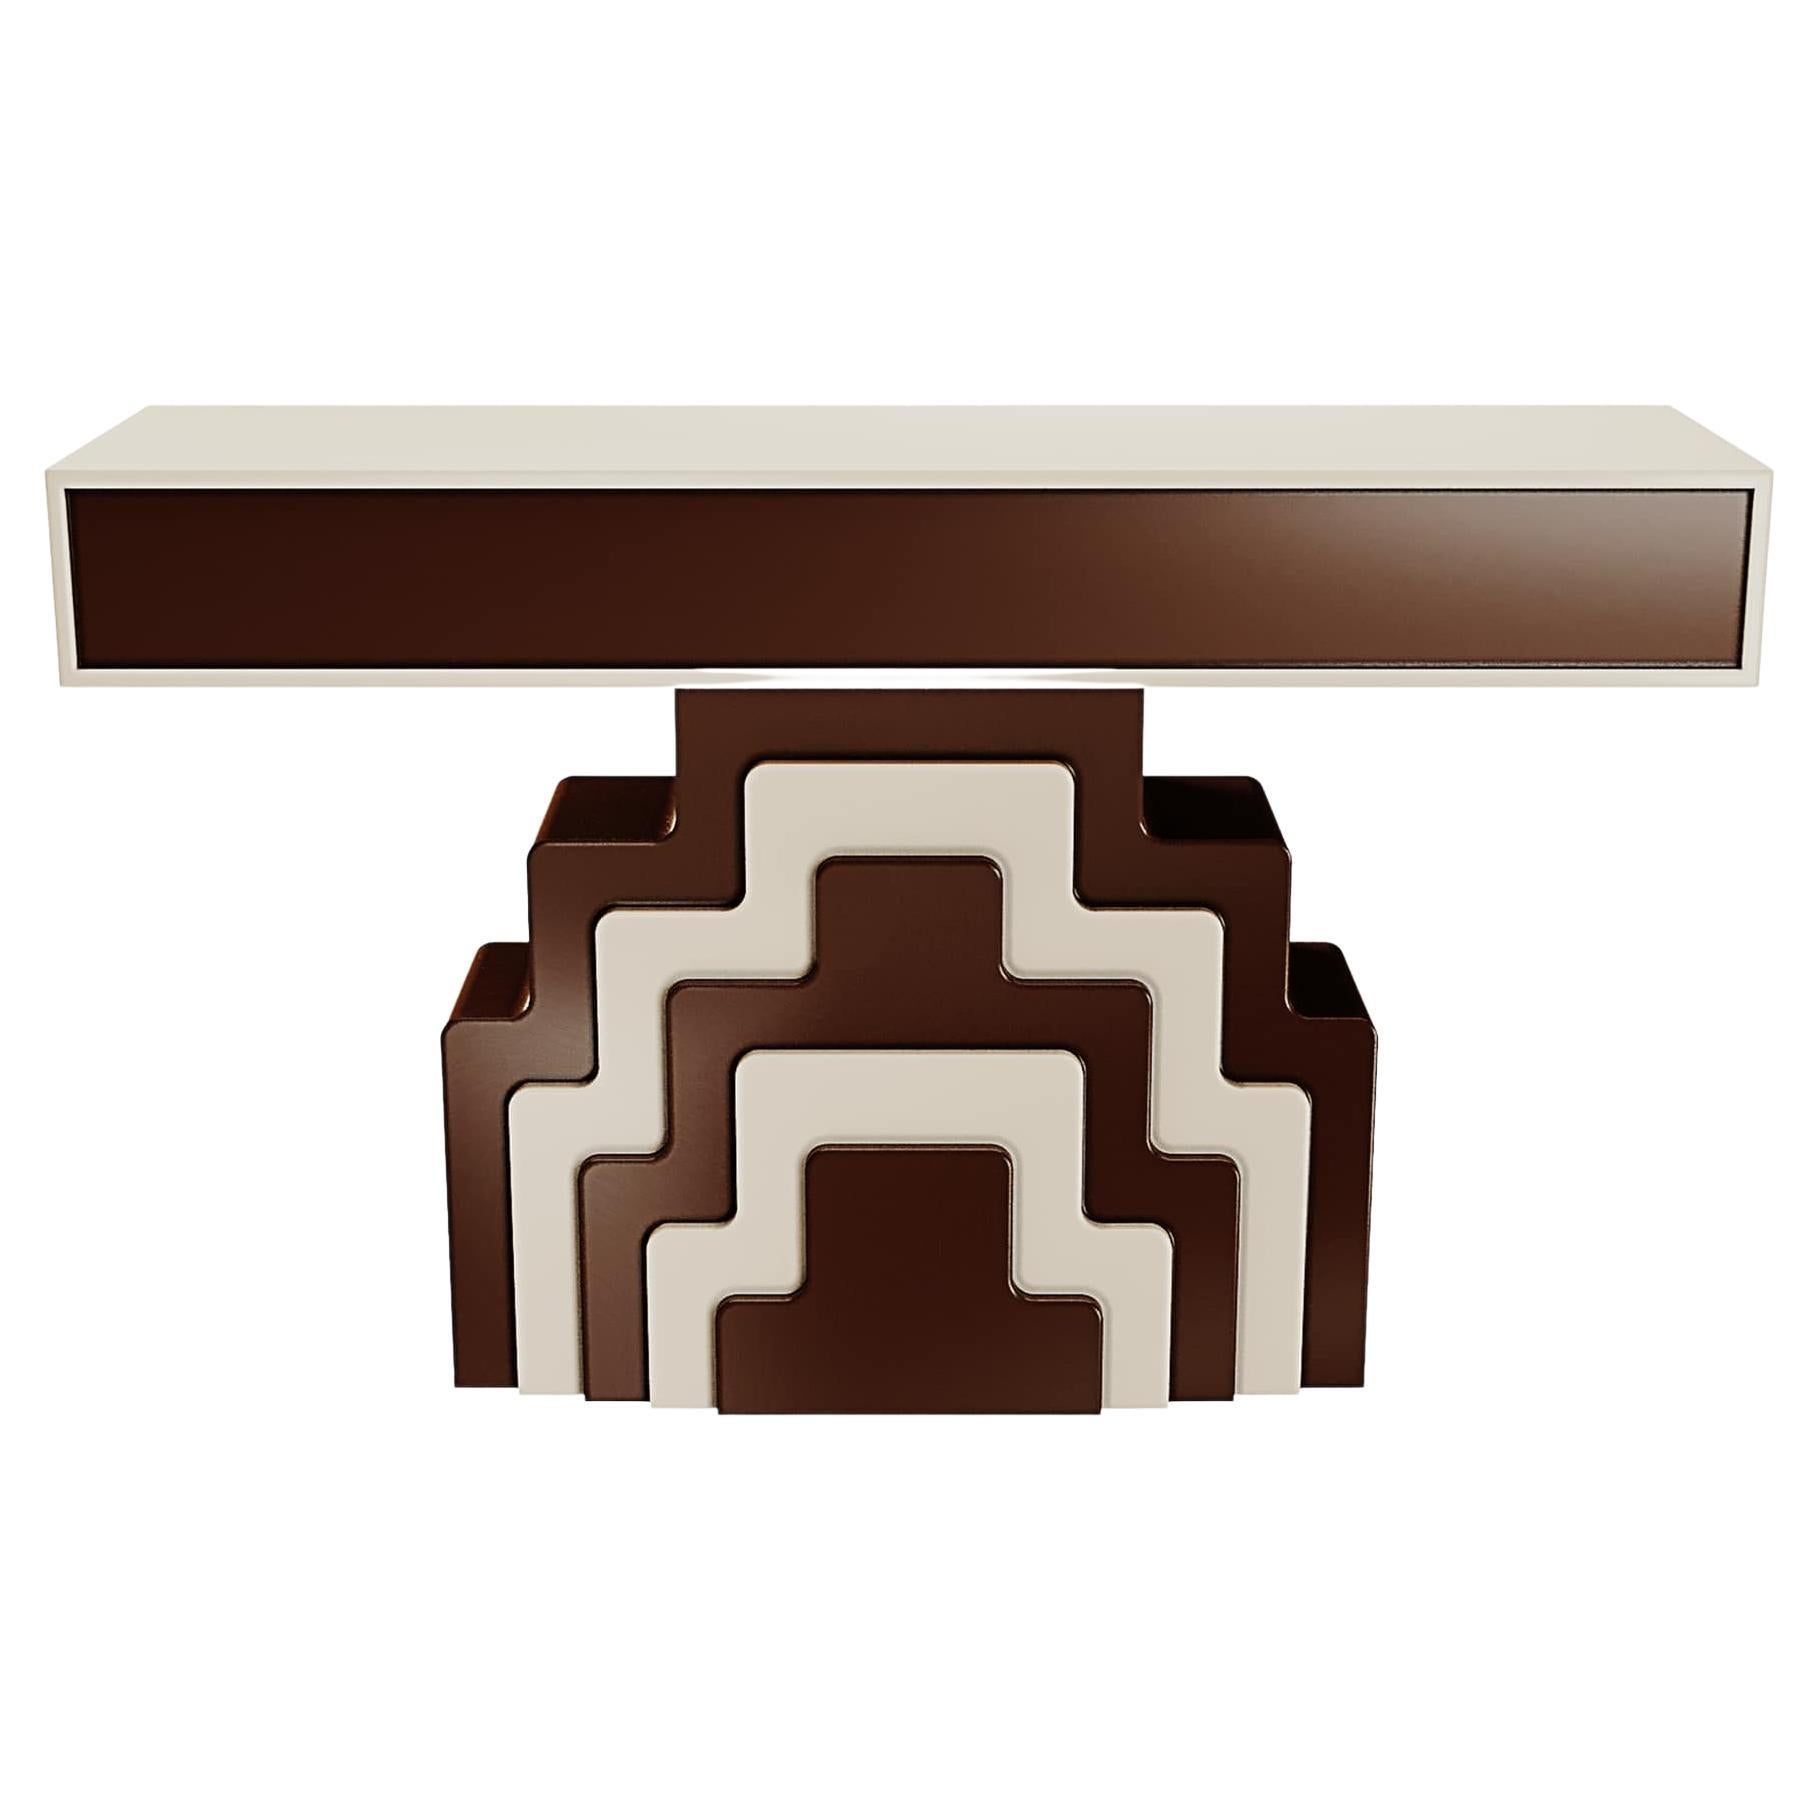 Art Deco Inspired Geometic Wood Console Table Brown & White Lacquer Two Drawers For Sale